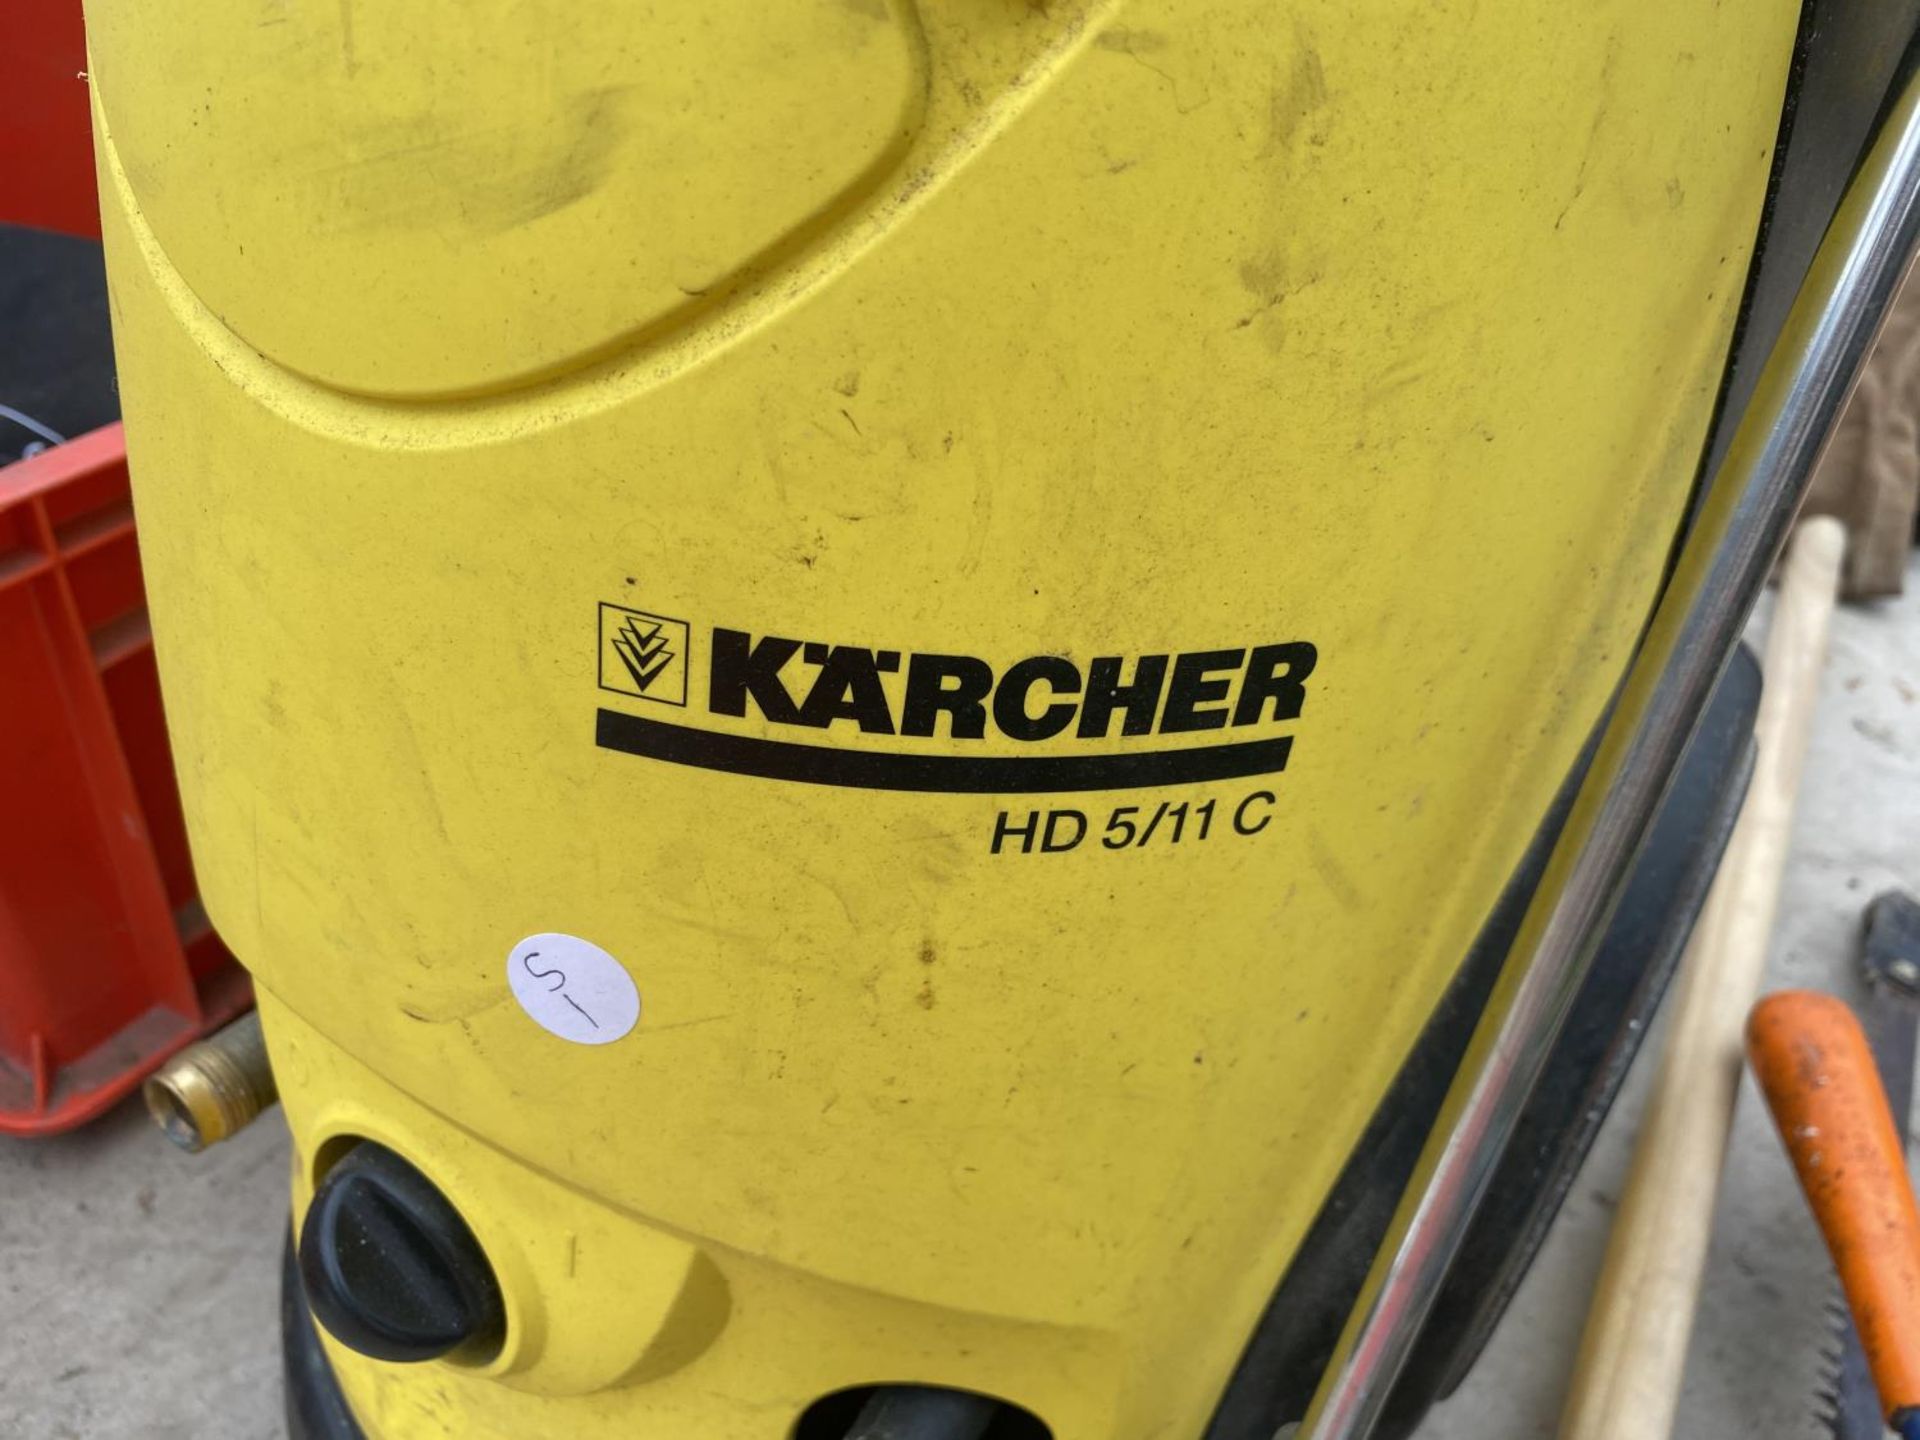 A KARCHER HD 5/11C PRESSURE WASHER - Image 3 of 3